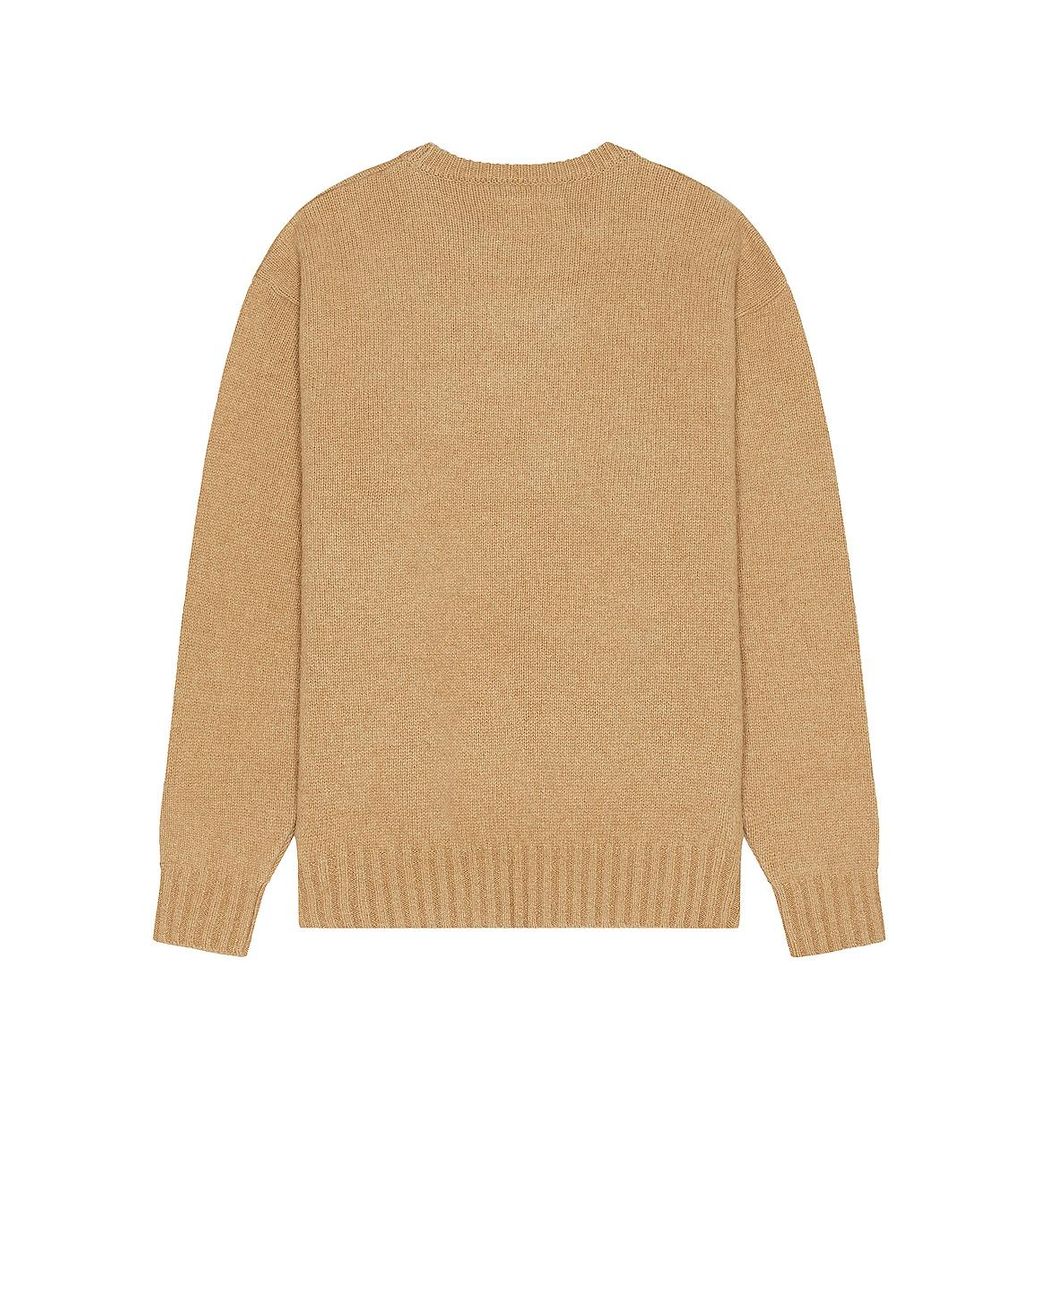 Wacko Maria Classic Crew Neck Sweater in Natural for Men | Lyst